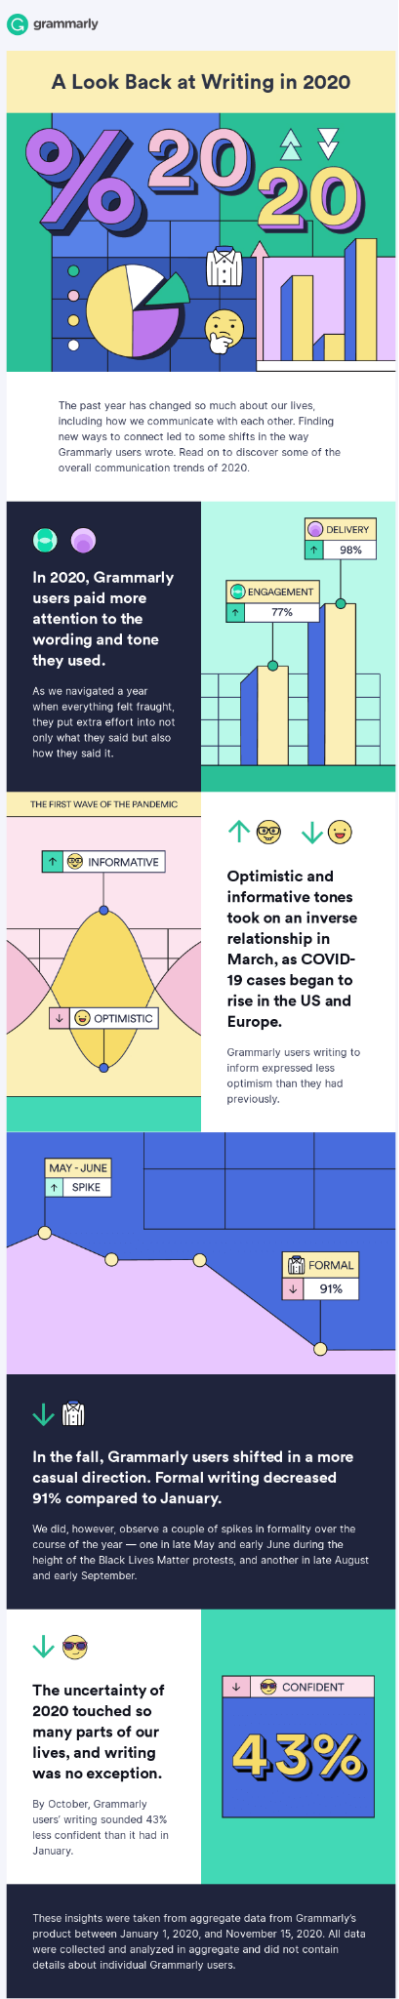 Year-in-review emails: Screenshot of Grammarly's year-in-review email